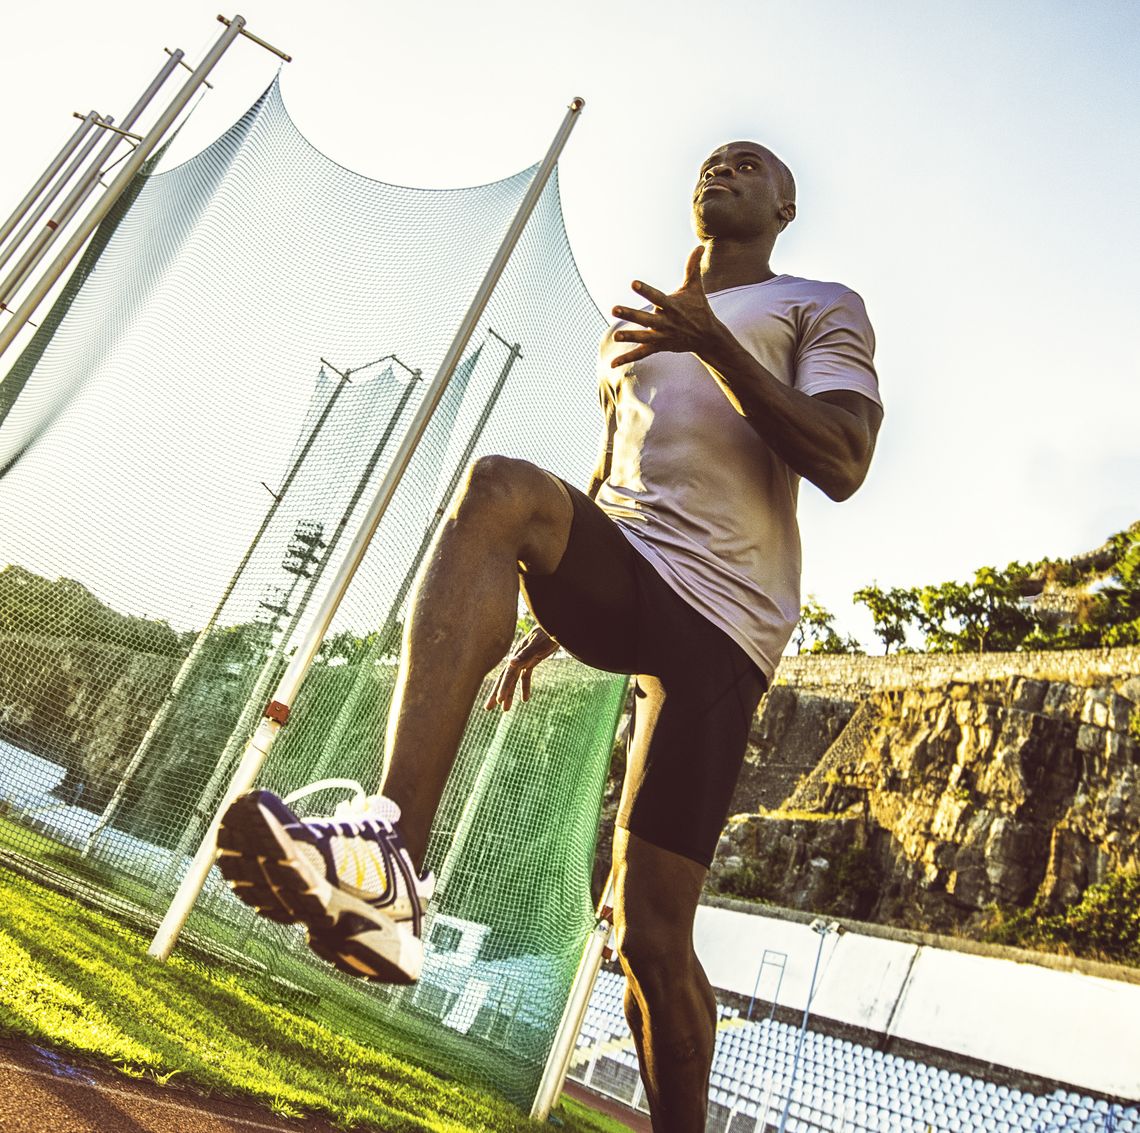 You Should Do Sprint Workouts Even After 40. This Drill Will Prep You for Speed.